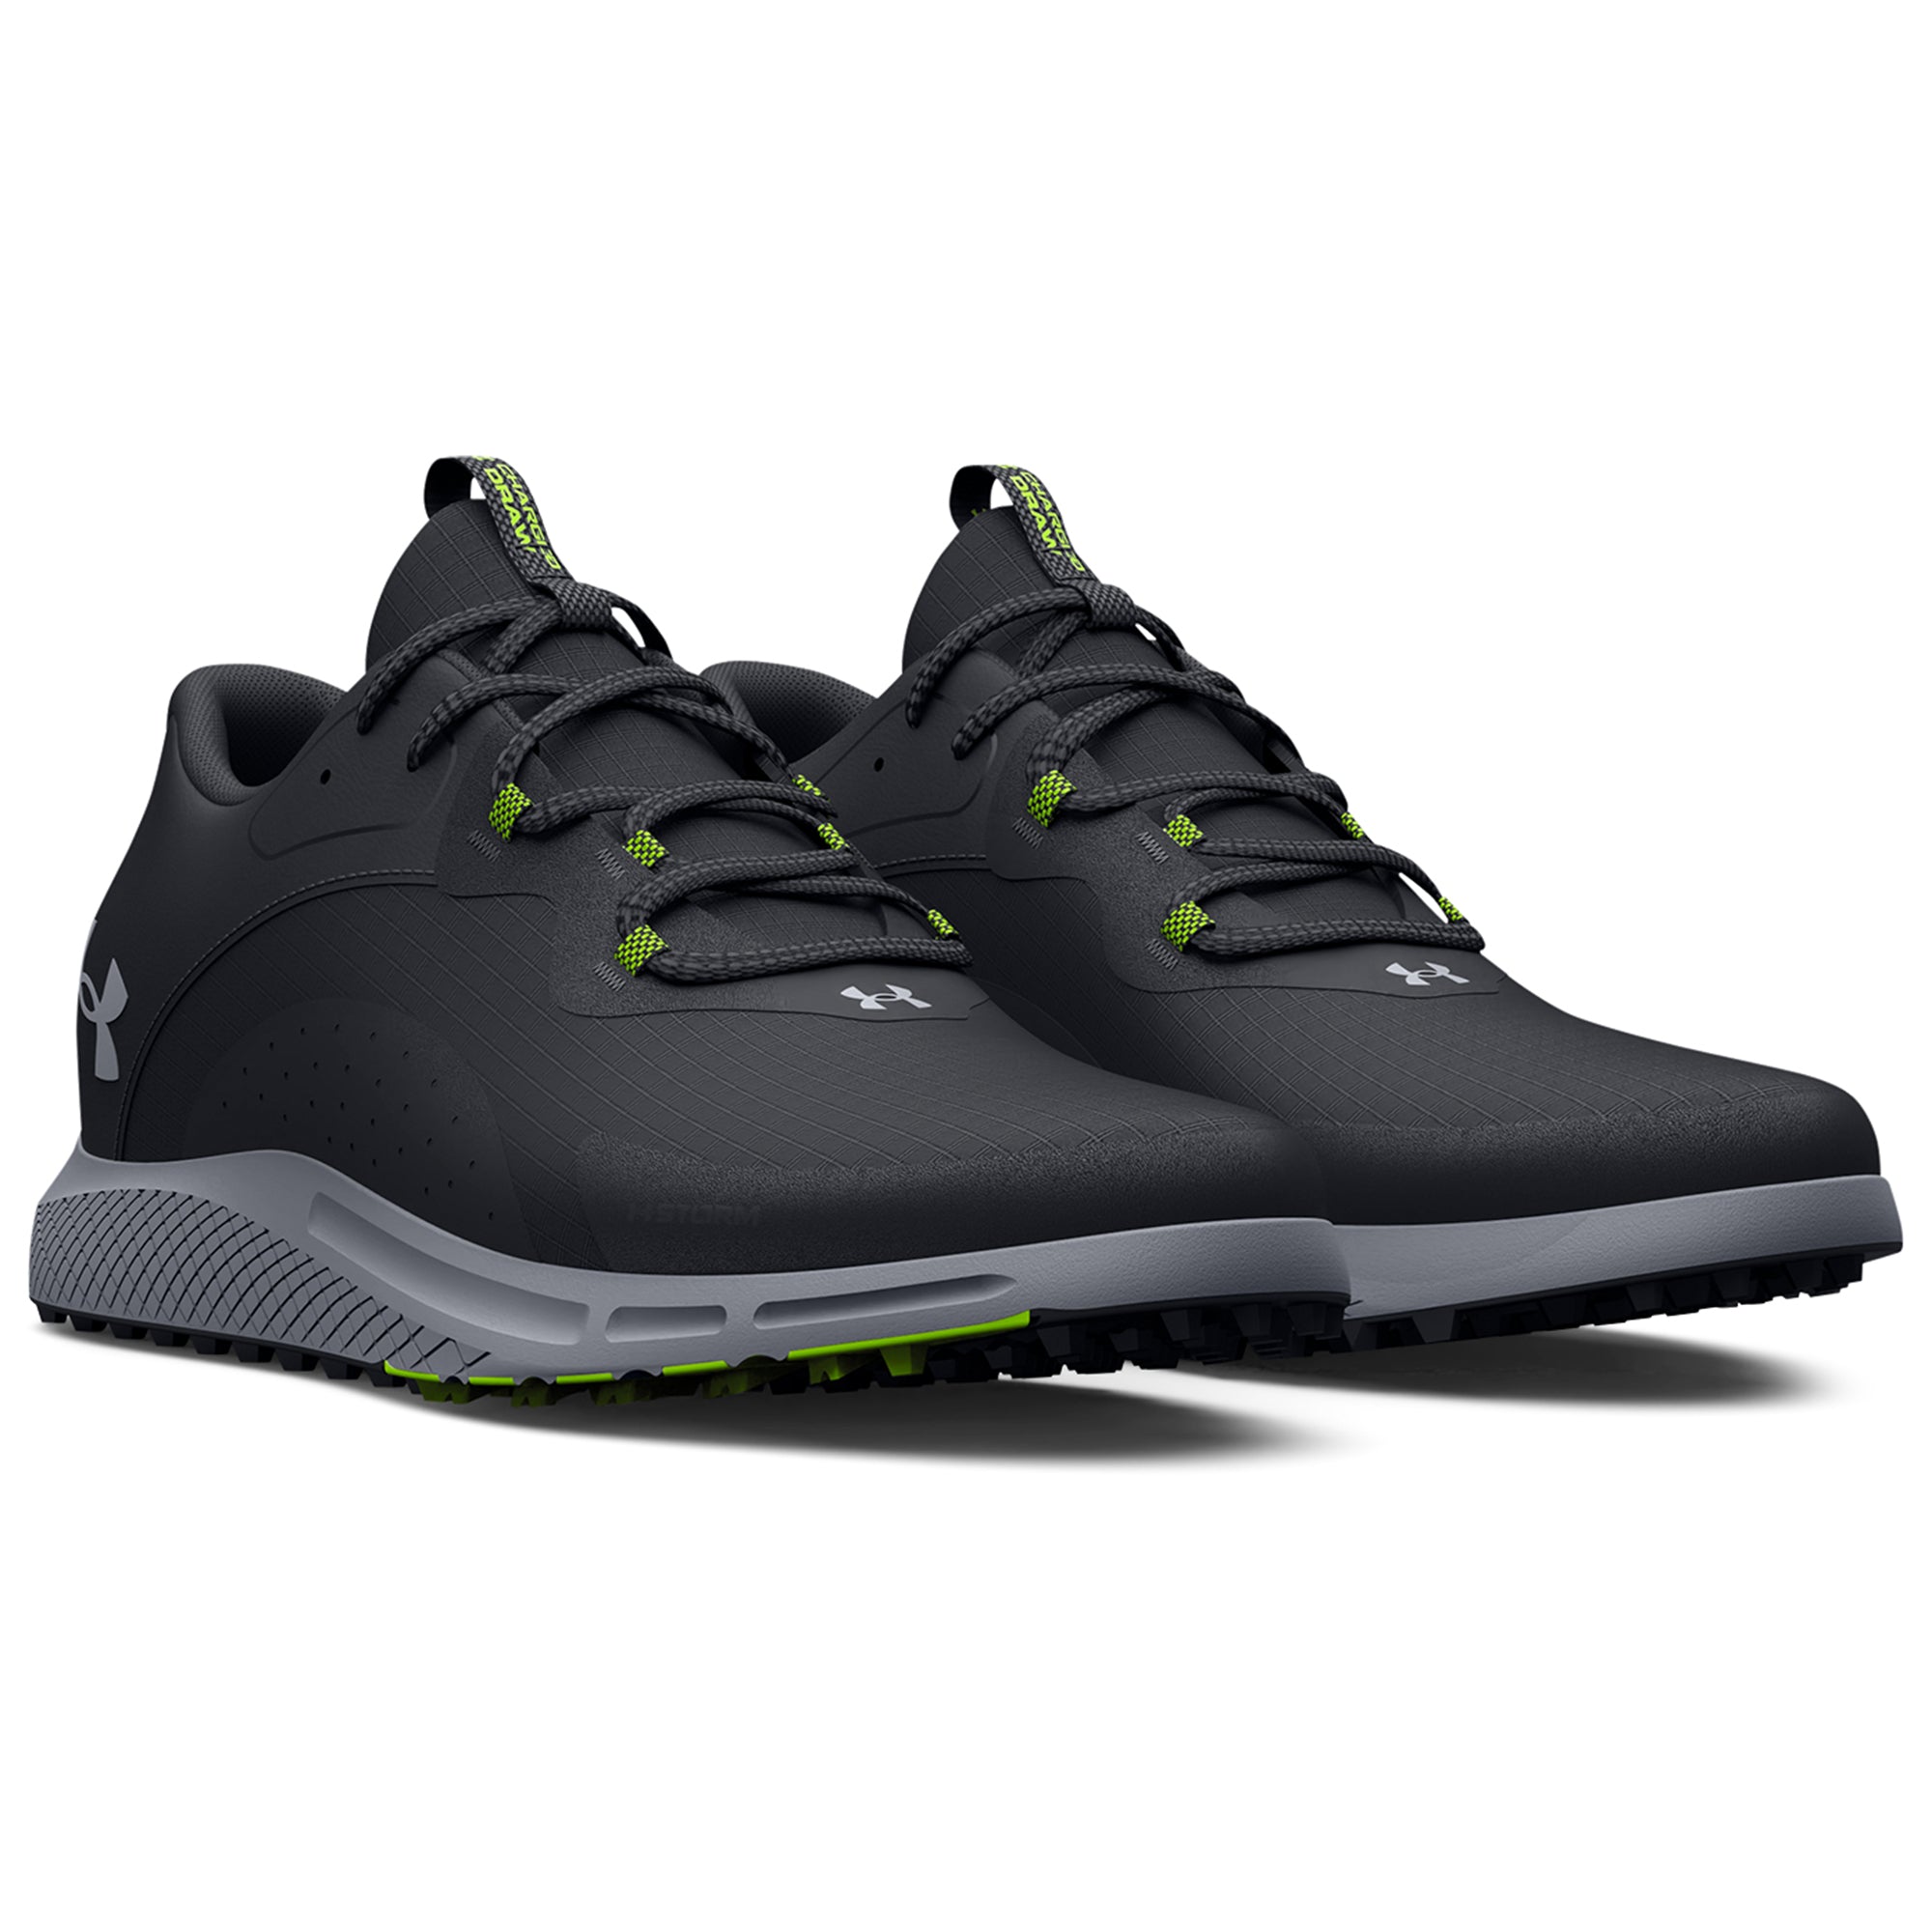 Under Armour Charged Draw 2 SL Golf Shoes 3026399 Black 001